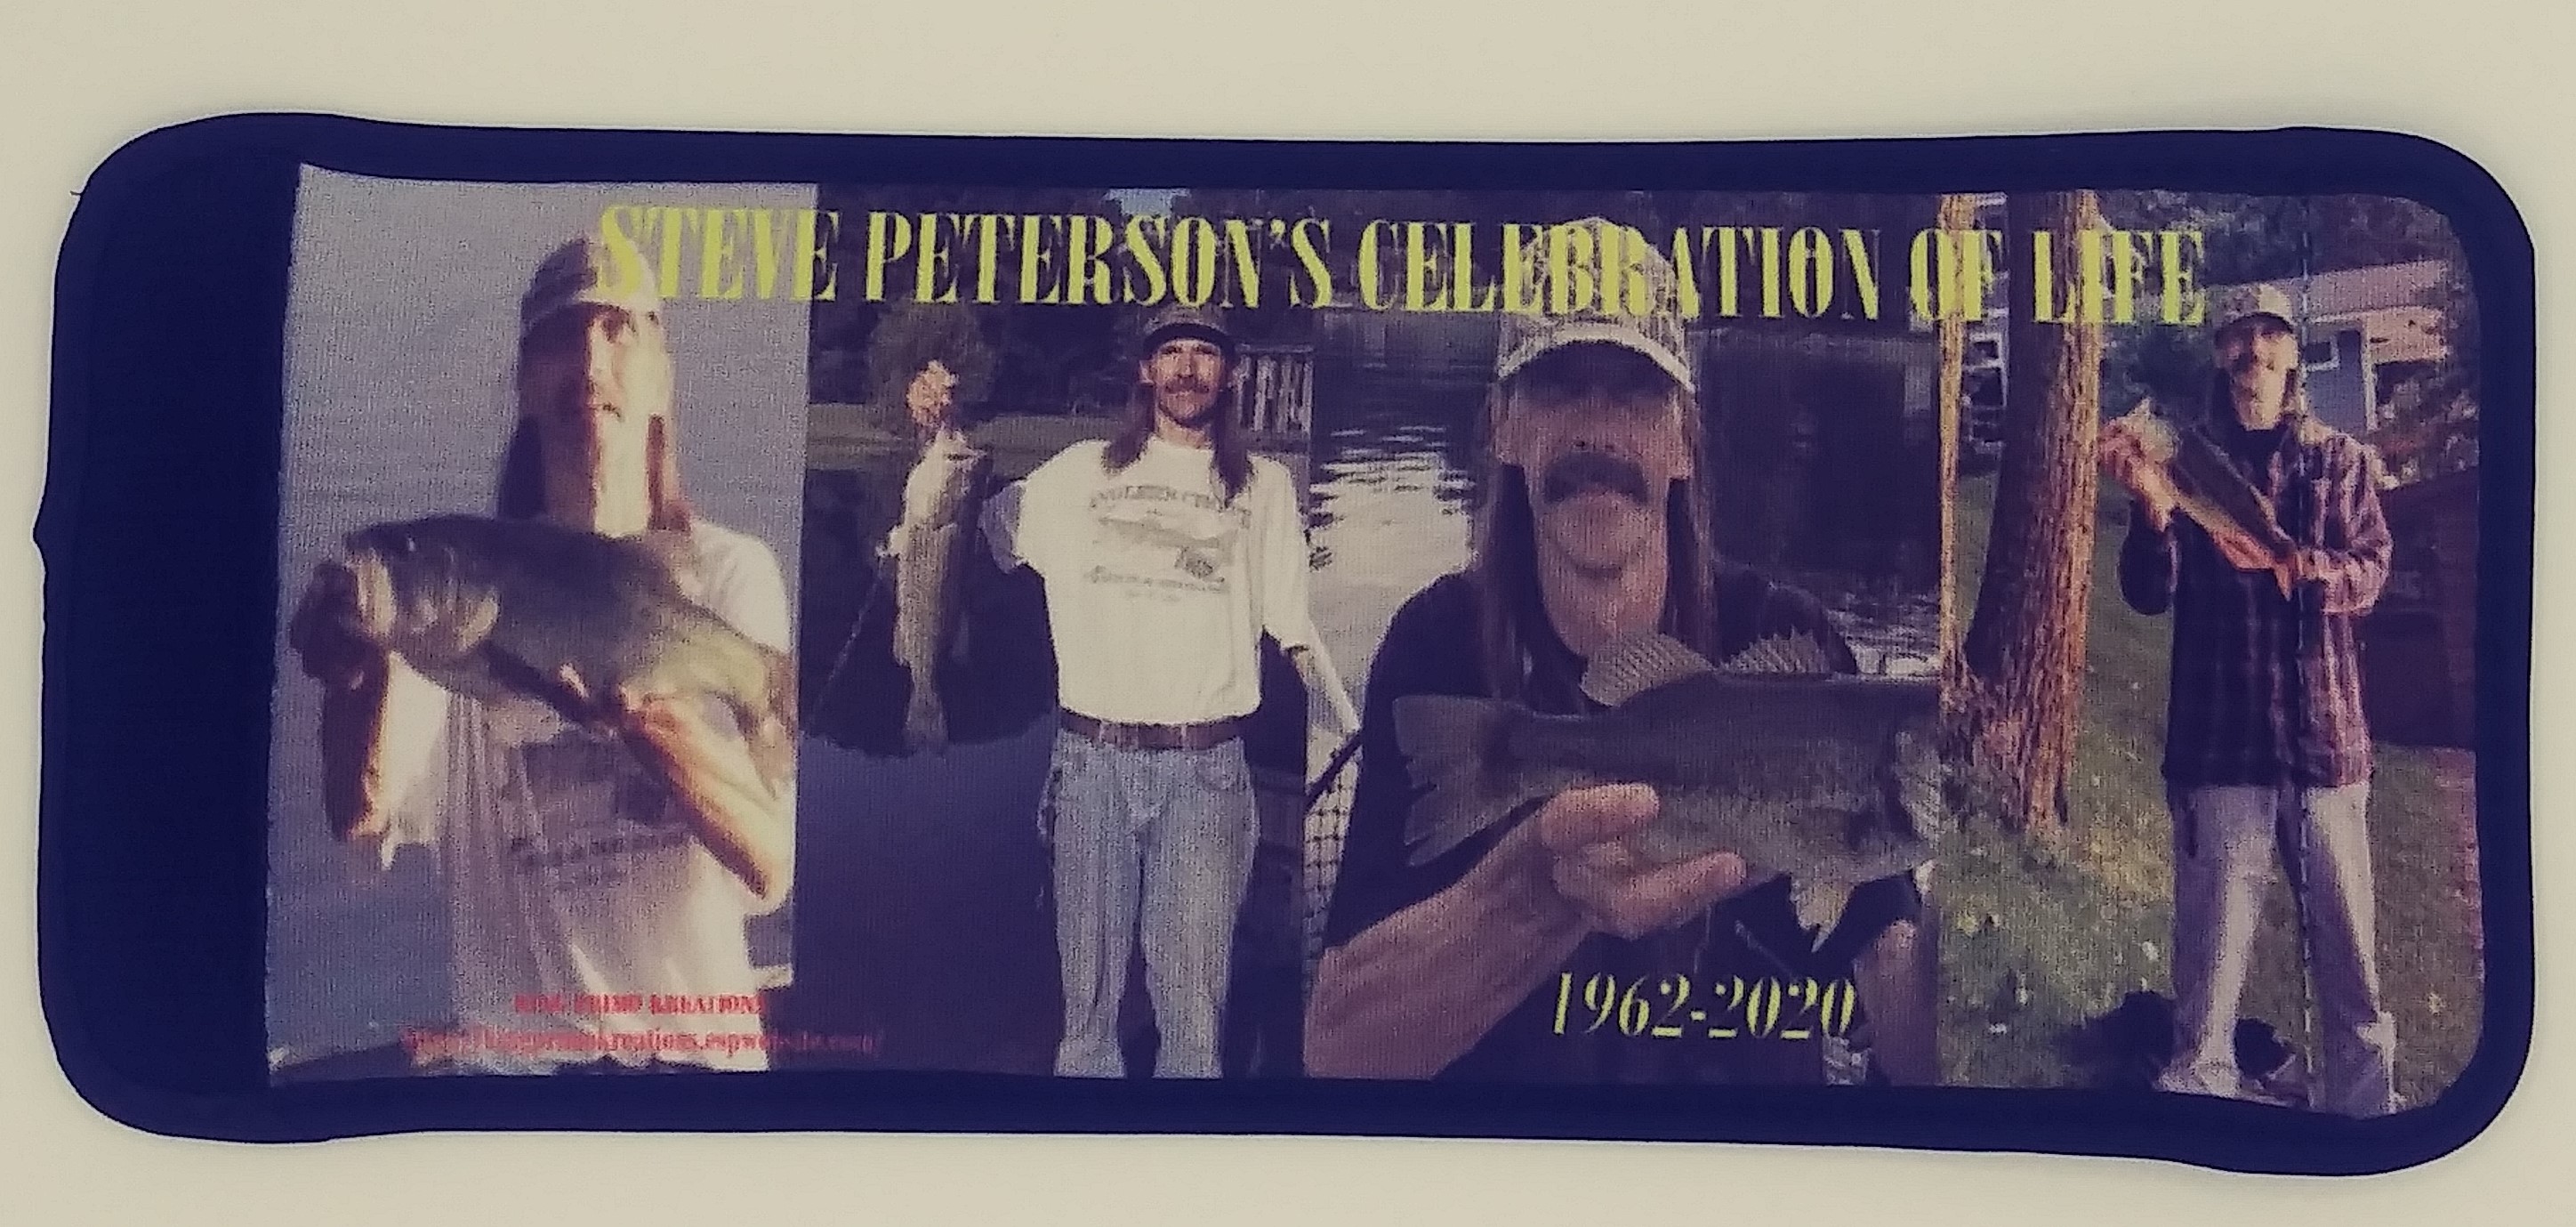 CELEBRATION OF LIFE HUGGER made with sublimation printing